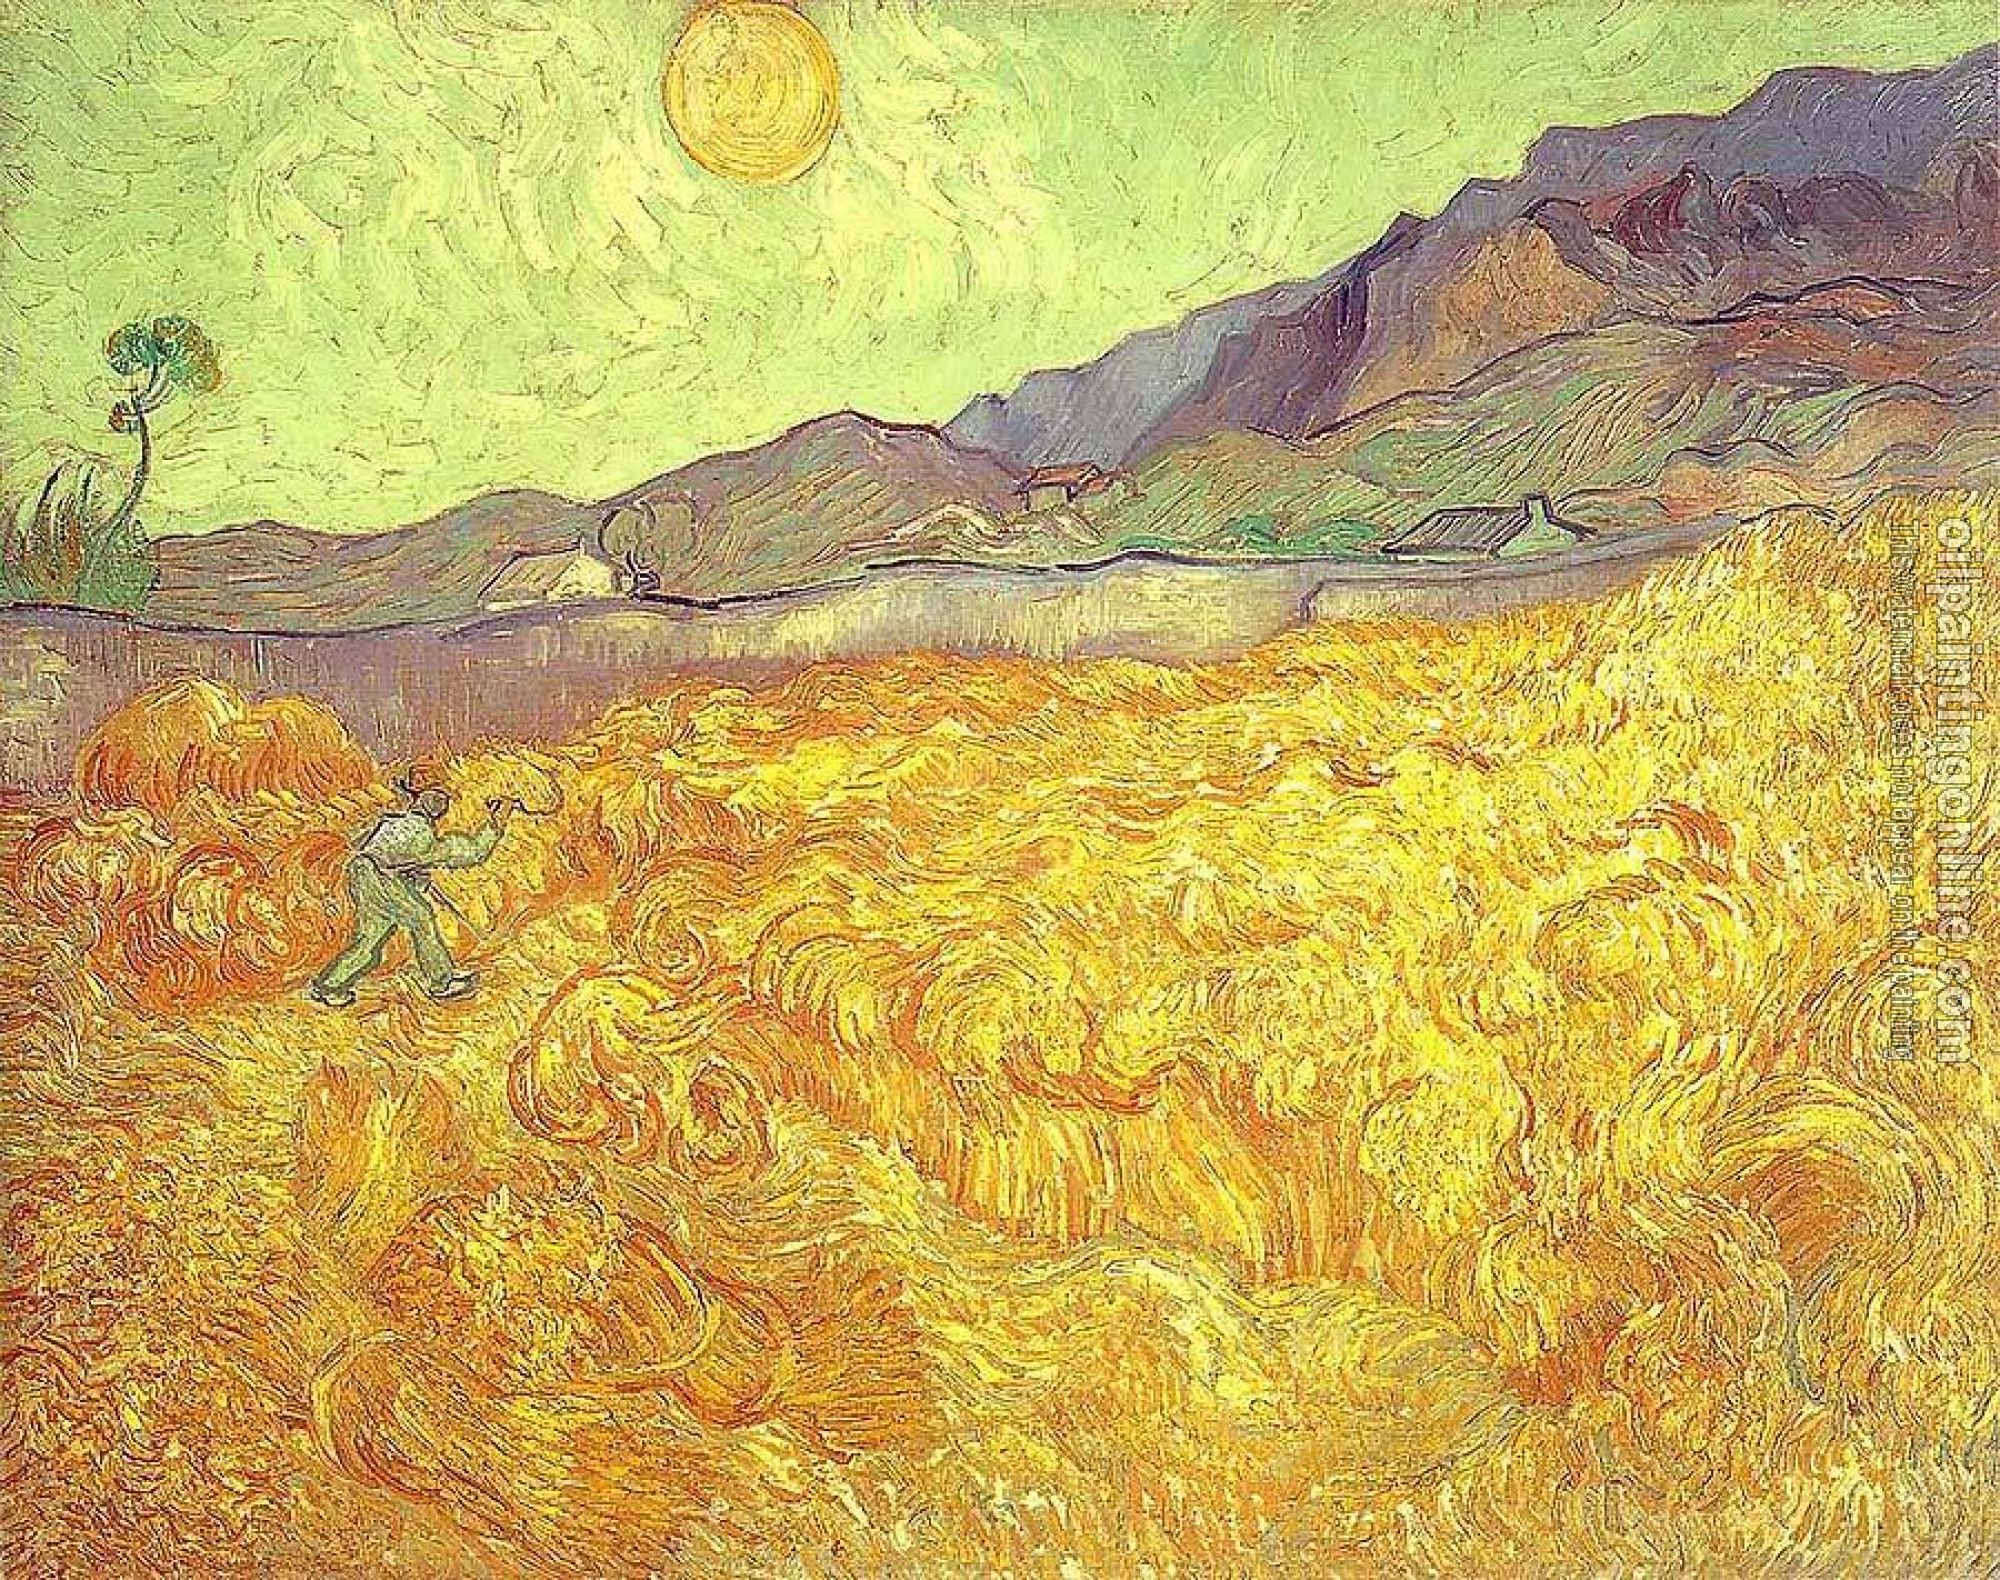 Gogh, Vincent van - Wheat Fields with Reaper at Sunrise